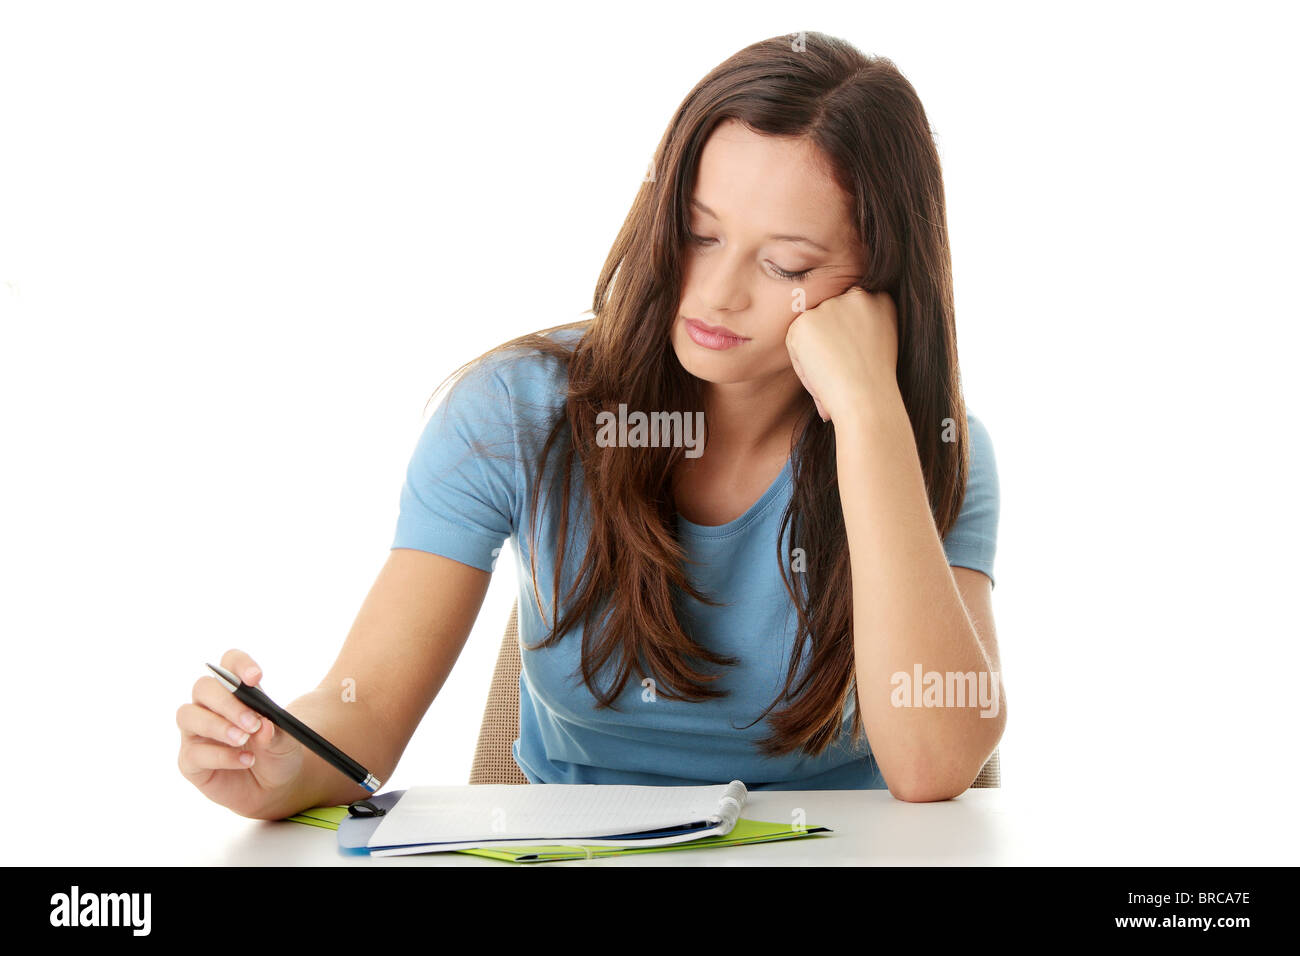 Teenage Girl Studying At The Desk Being Tired Isolated On White